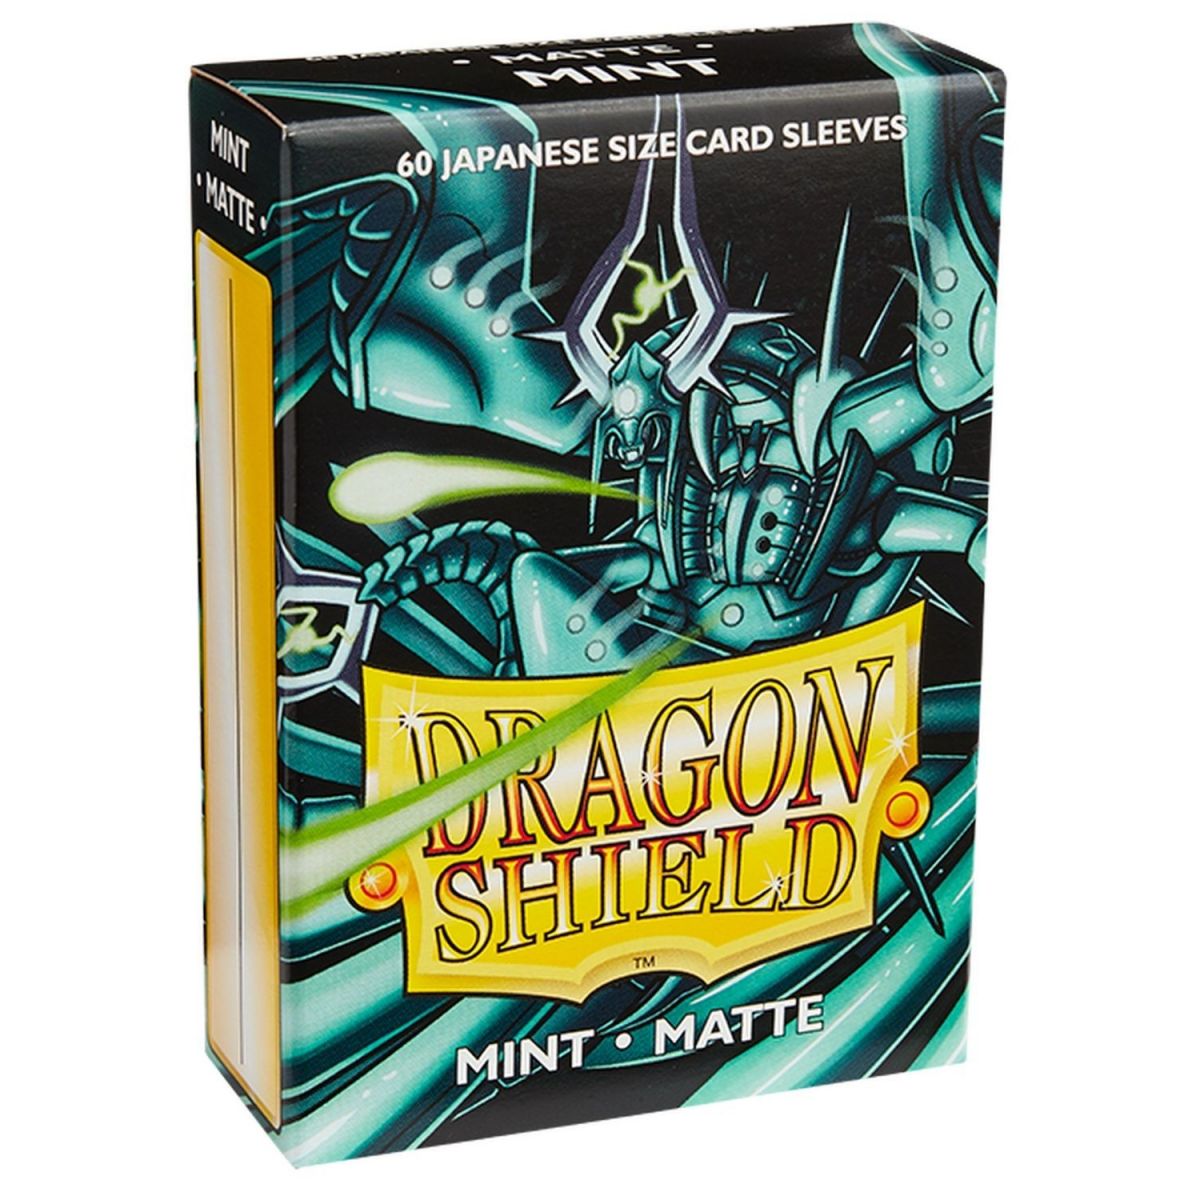 Item Dragon Shield - Small Sleeves - Japanese Size - Matte Mint (60)